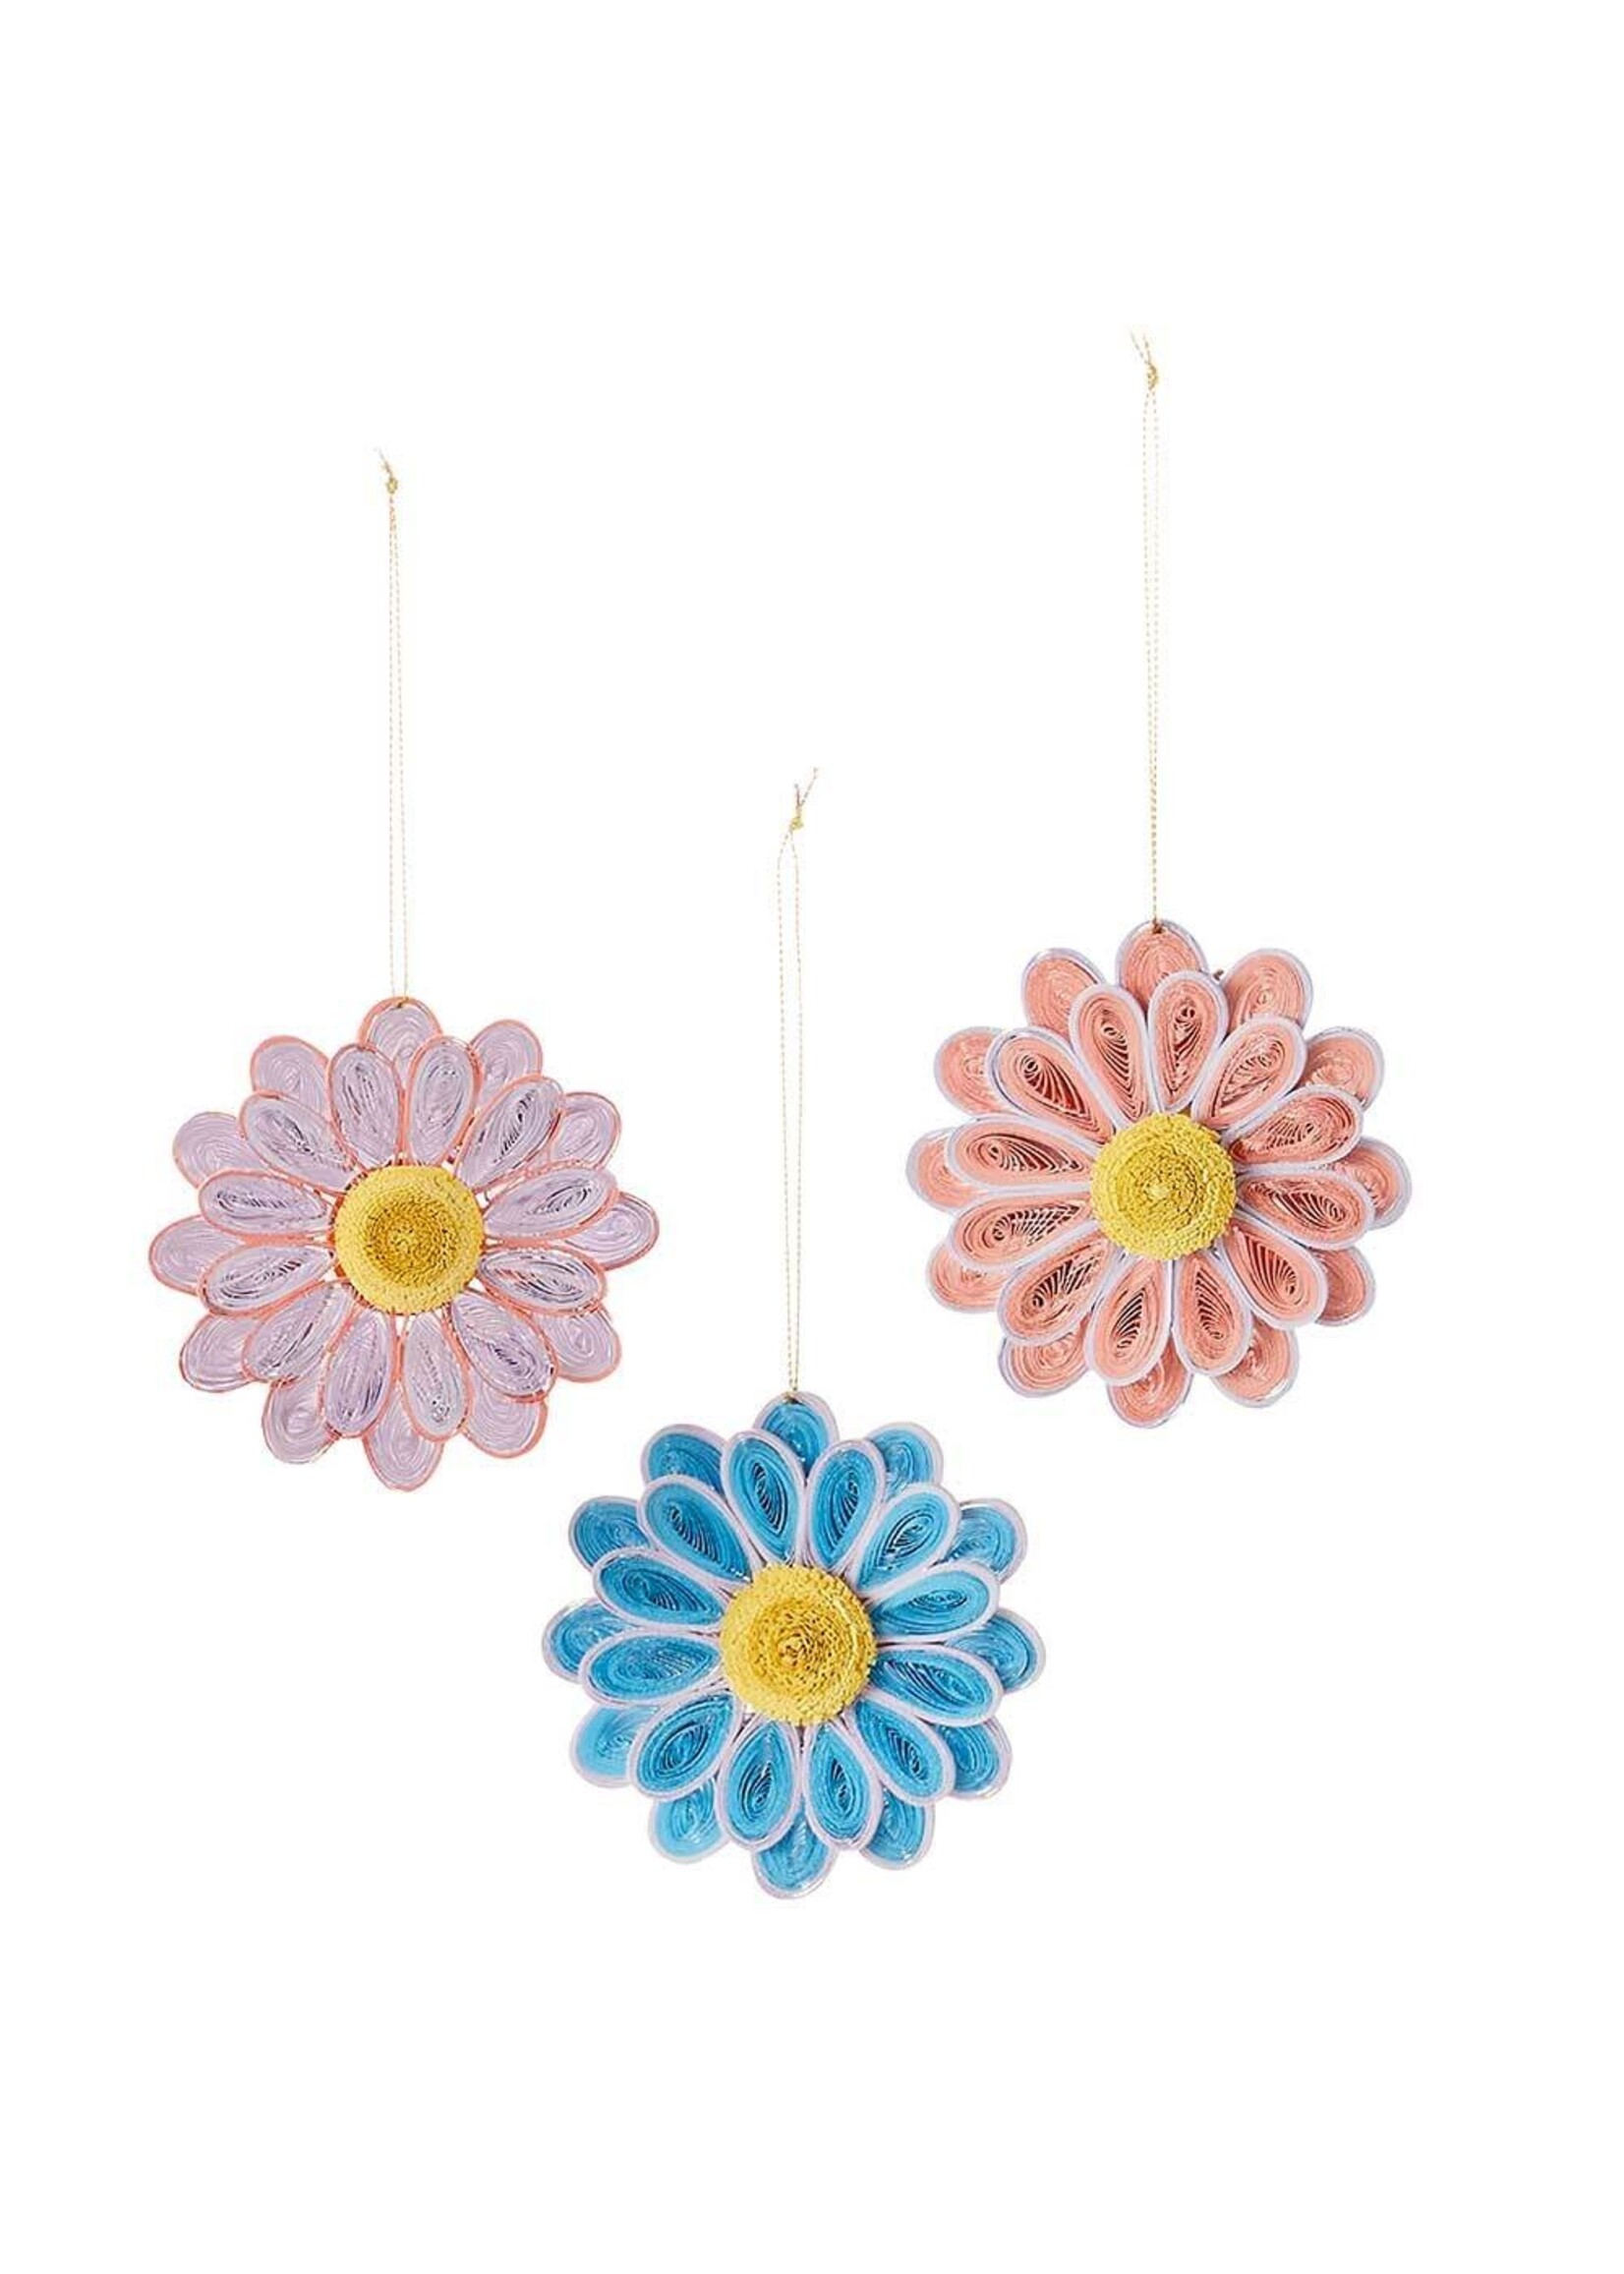 Ornament- Quilled Daisy